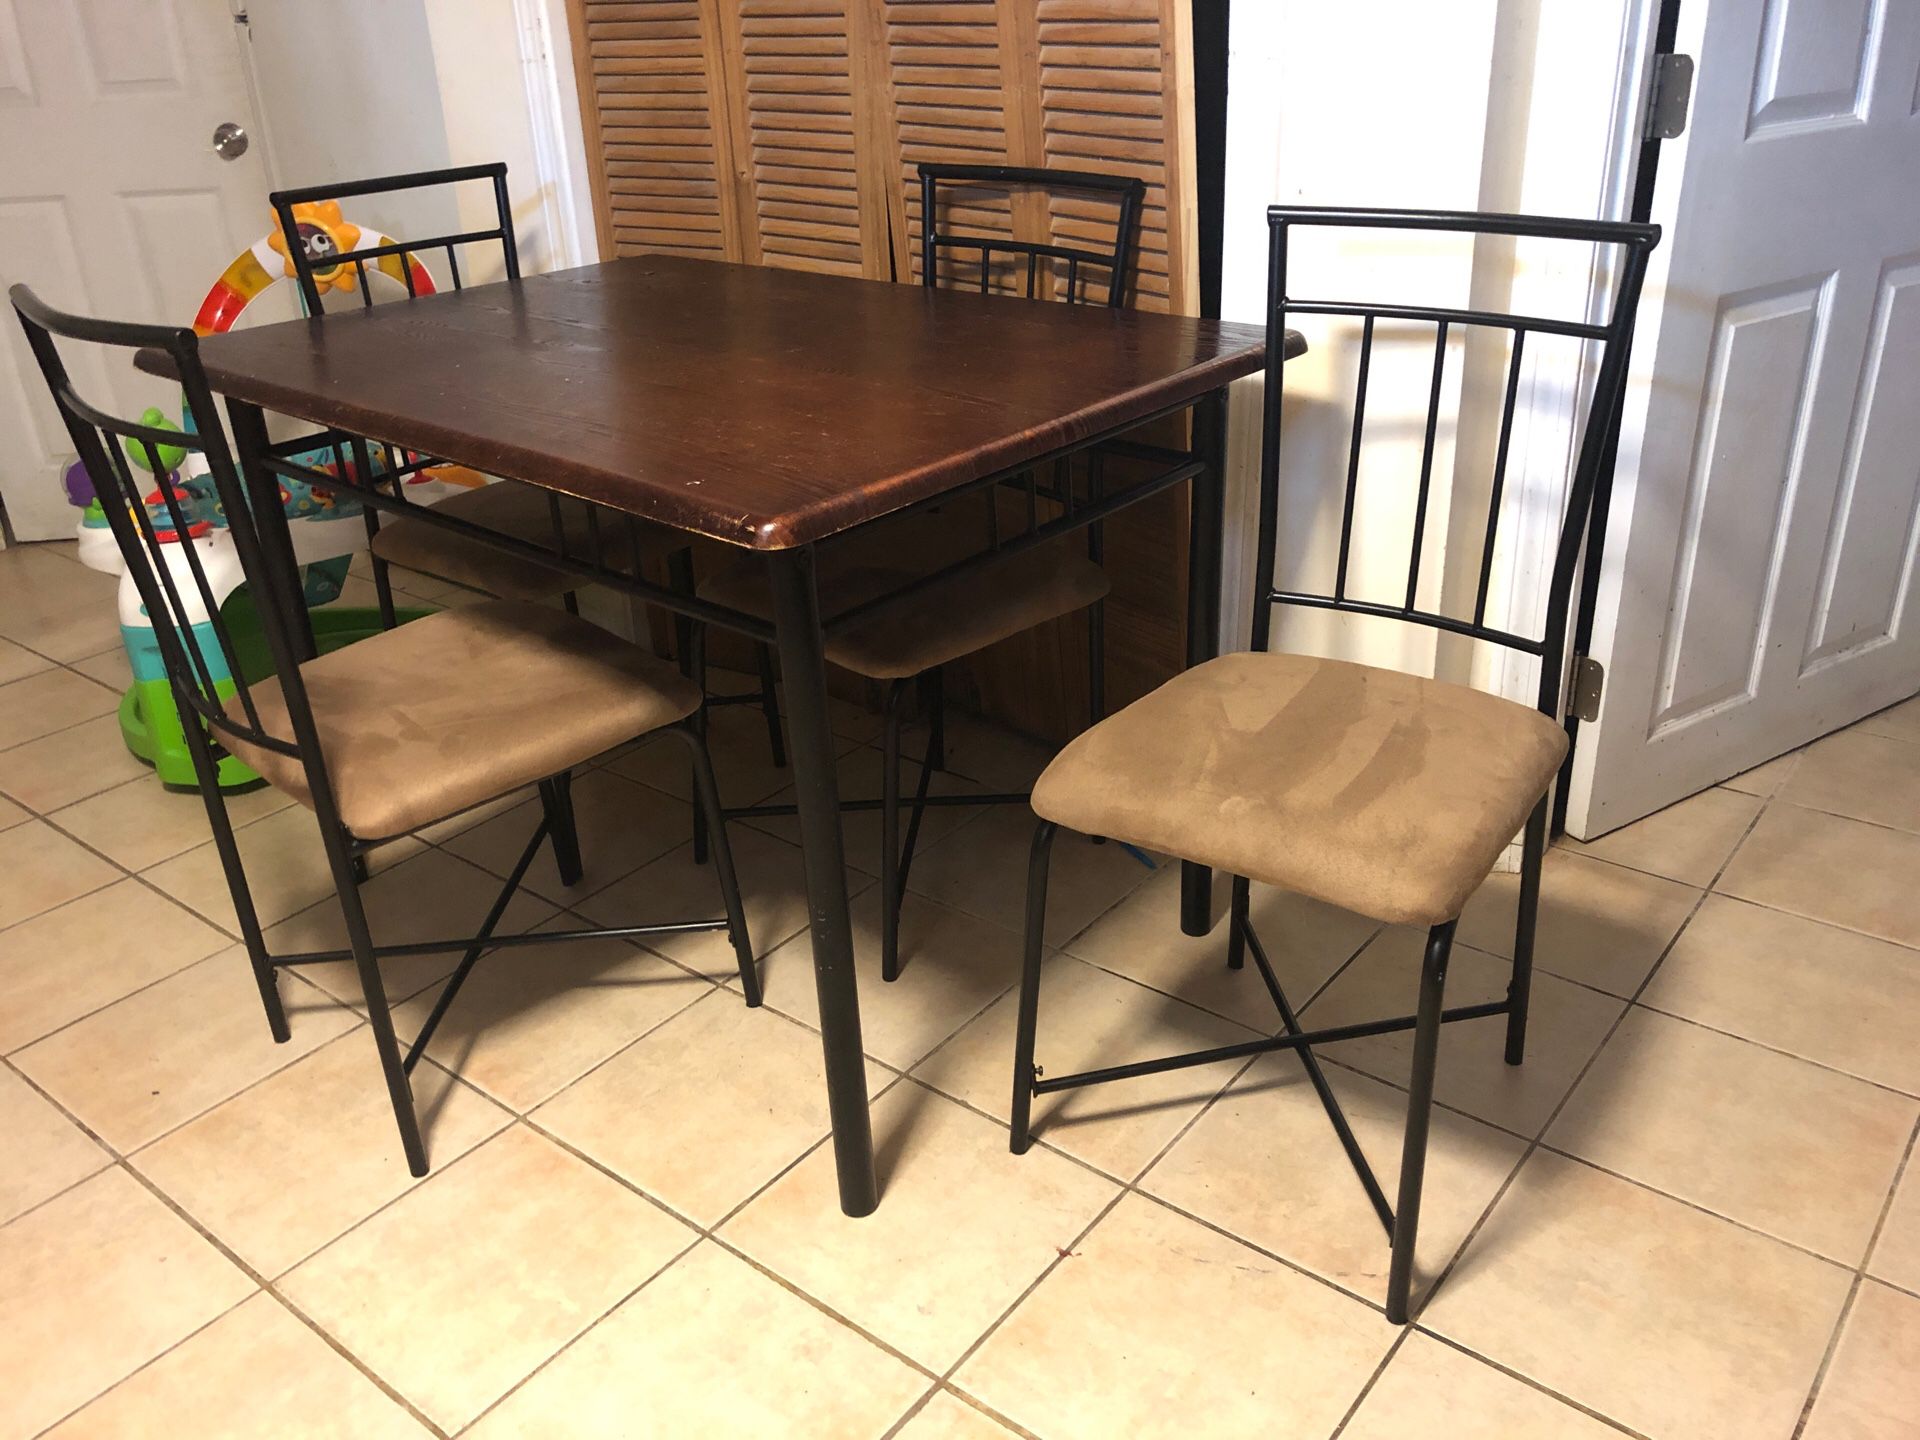 Small kitchen table